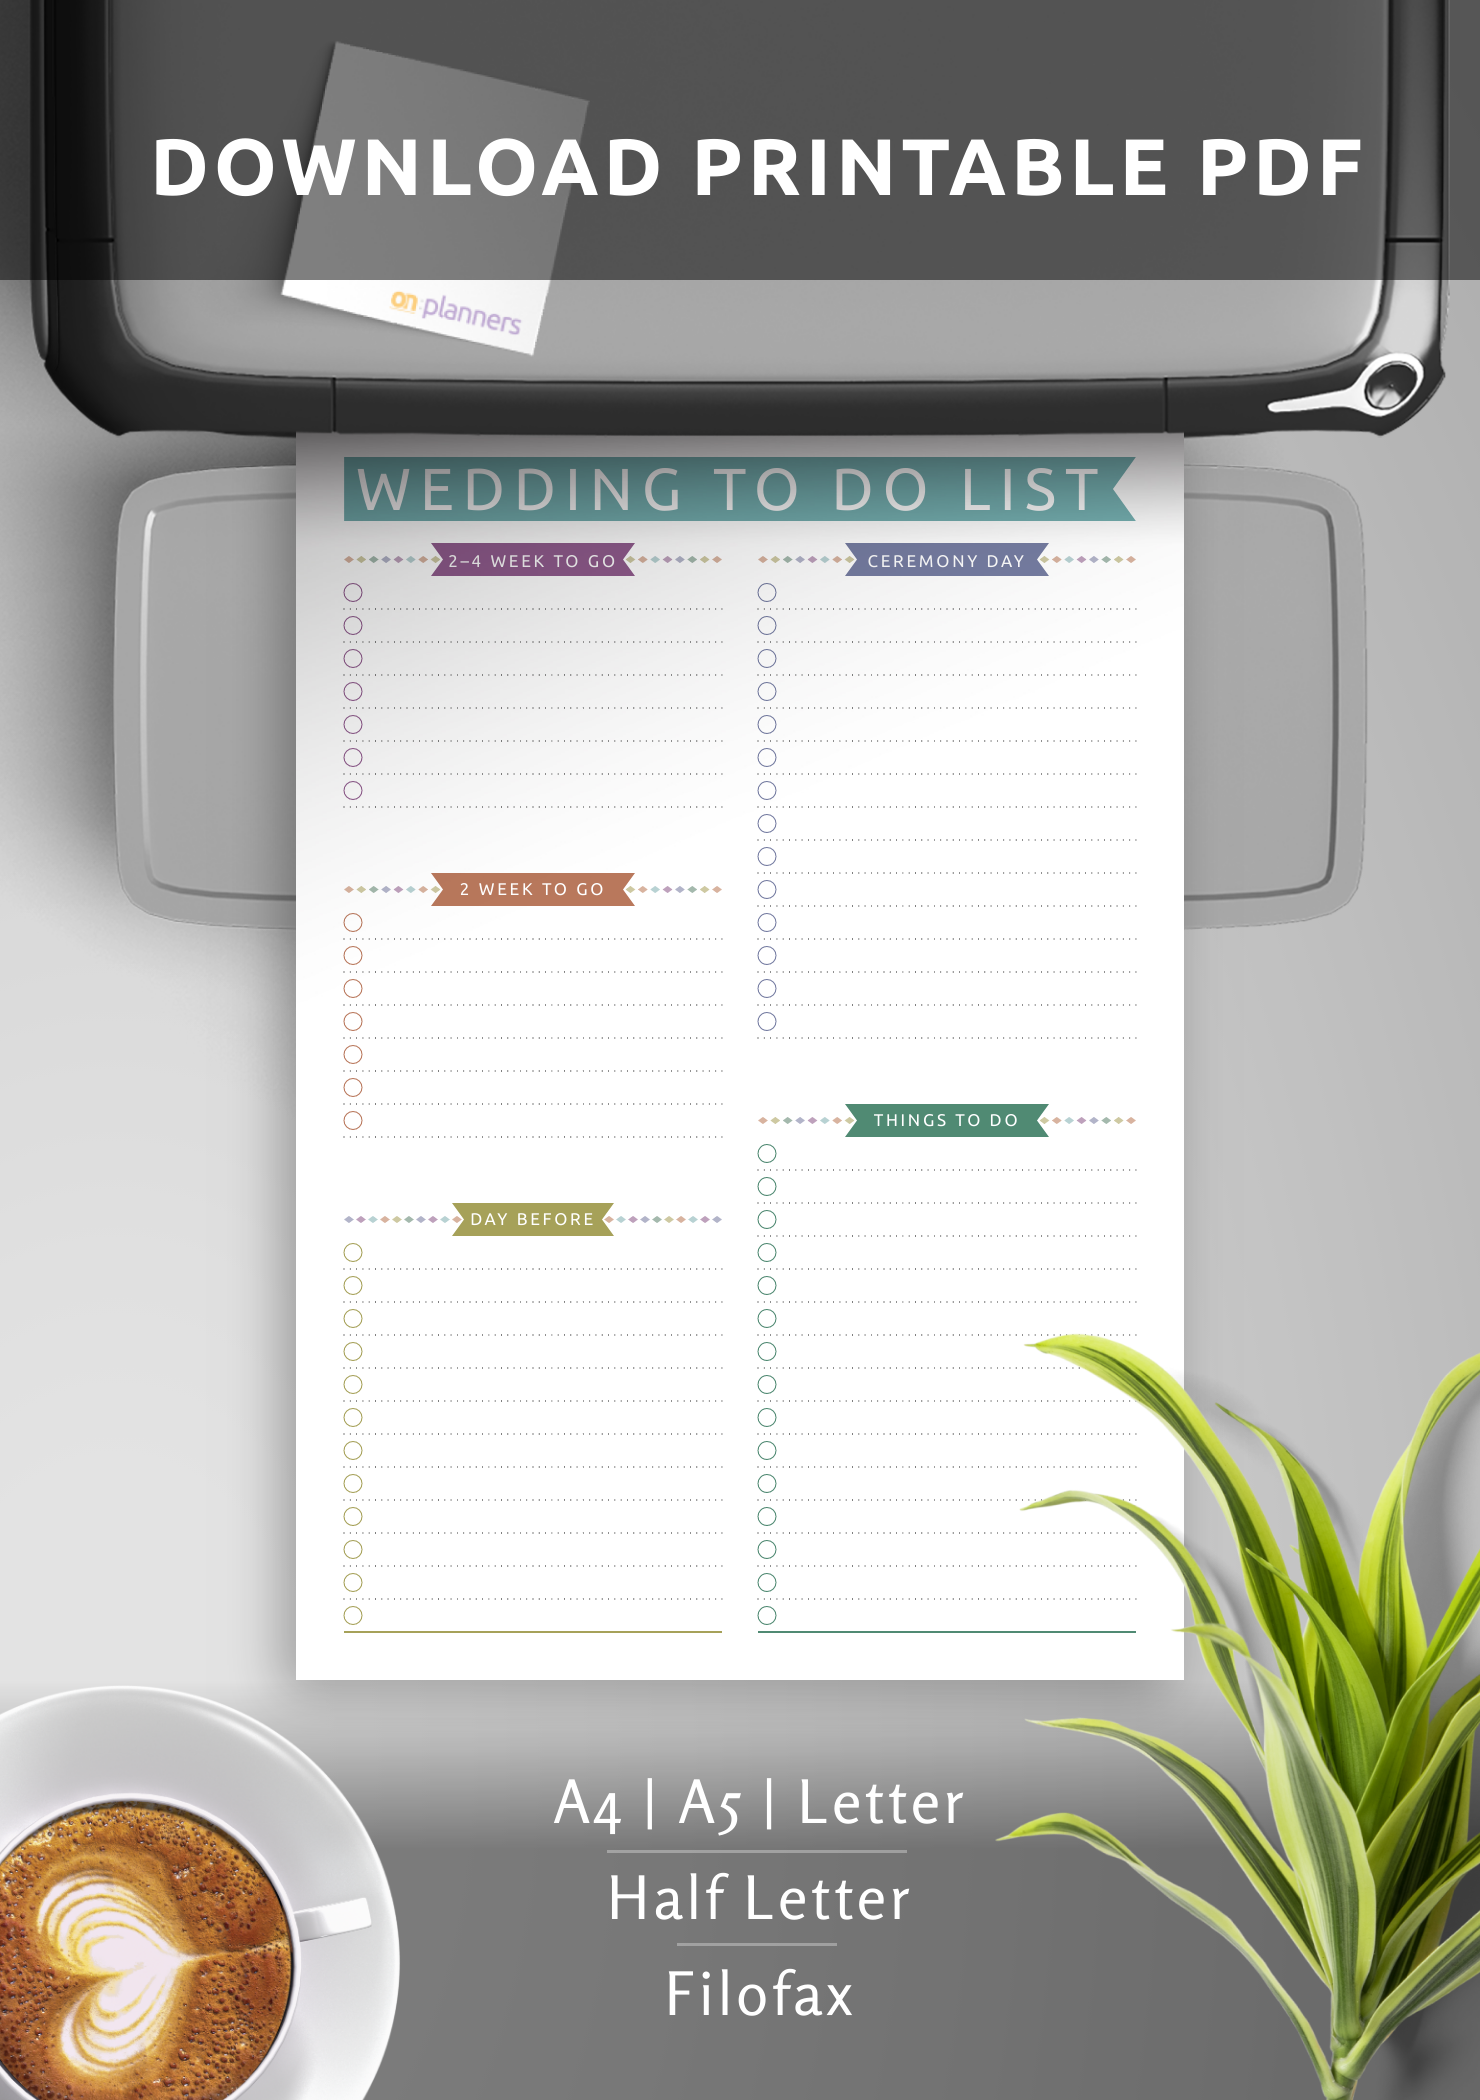 Download Printable Wedding To Do List Template - Casual PDF